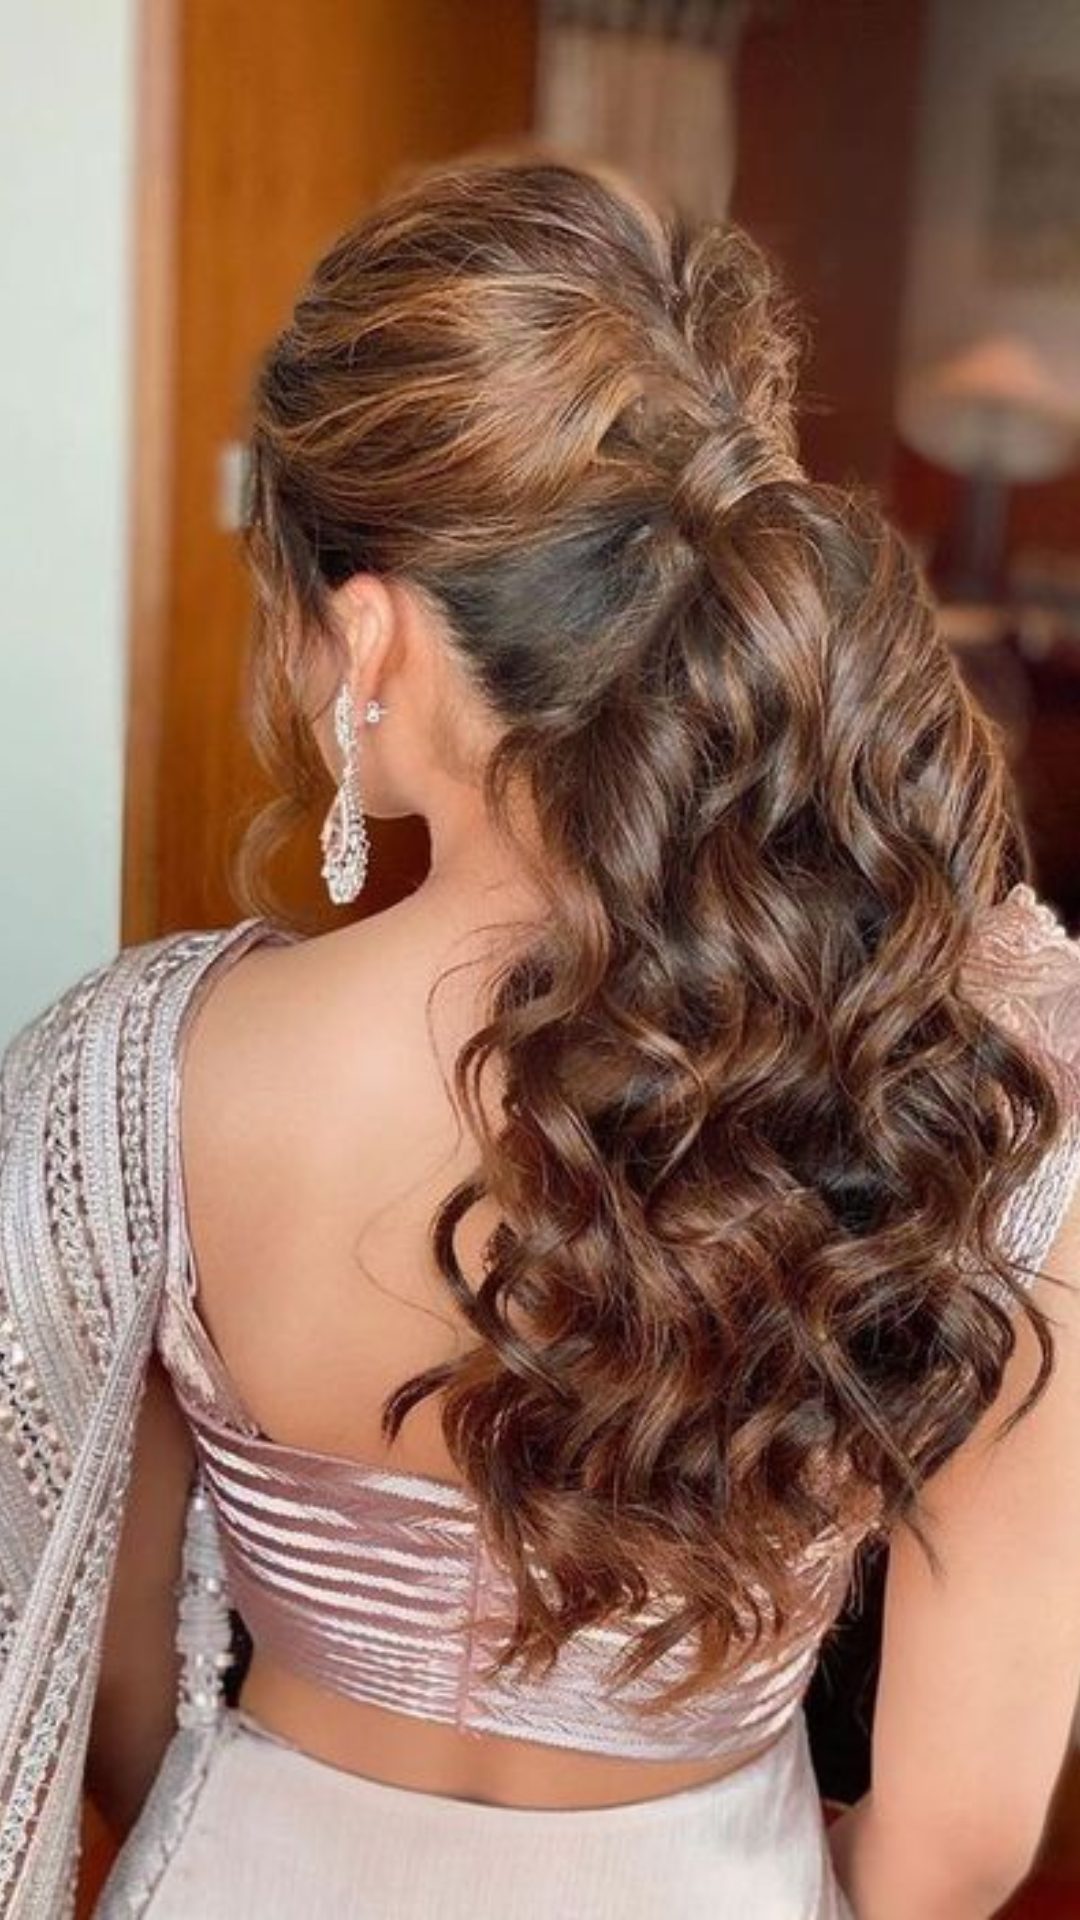 4 Easy & adorable Hairstyle for sarees - easy hairstyles | simple hairstyles  | Hairstyles - YouTube